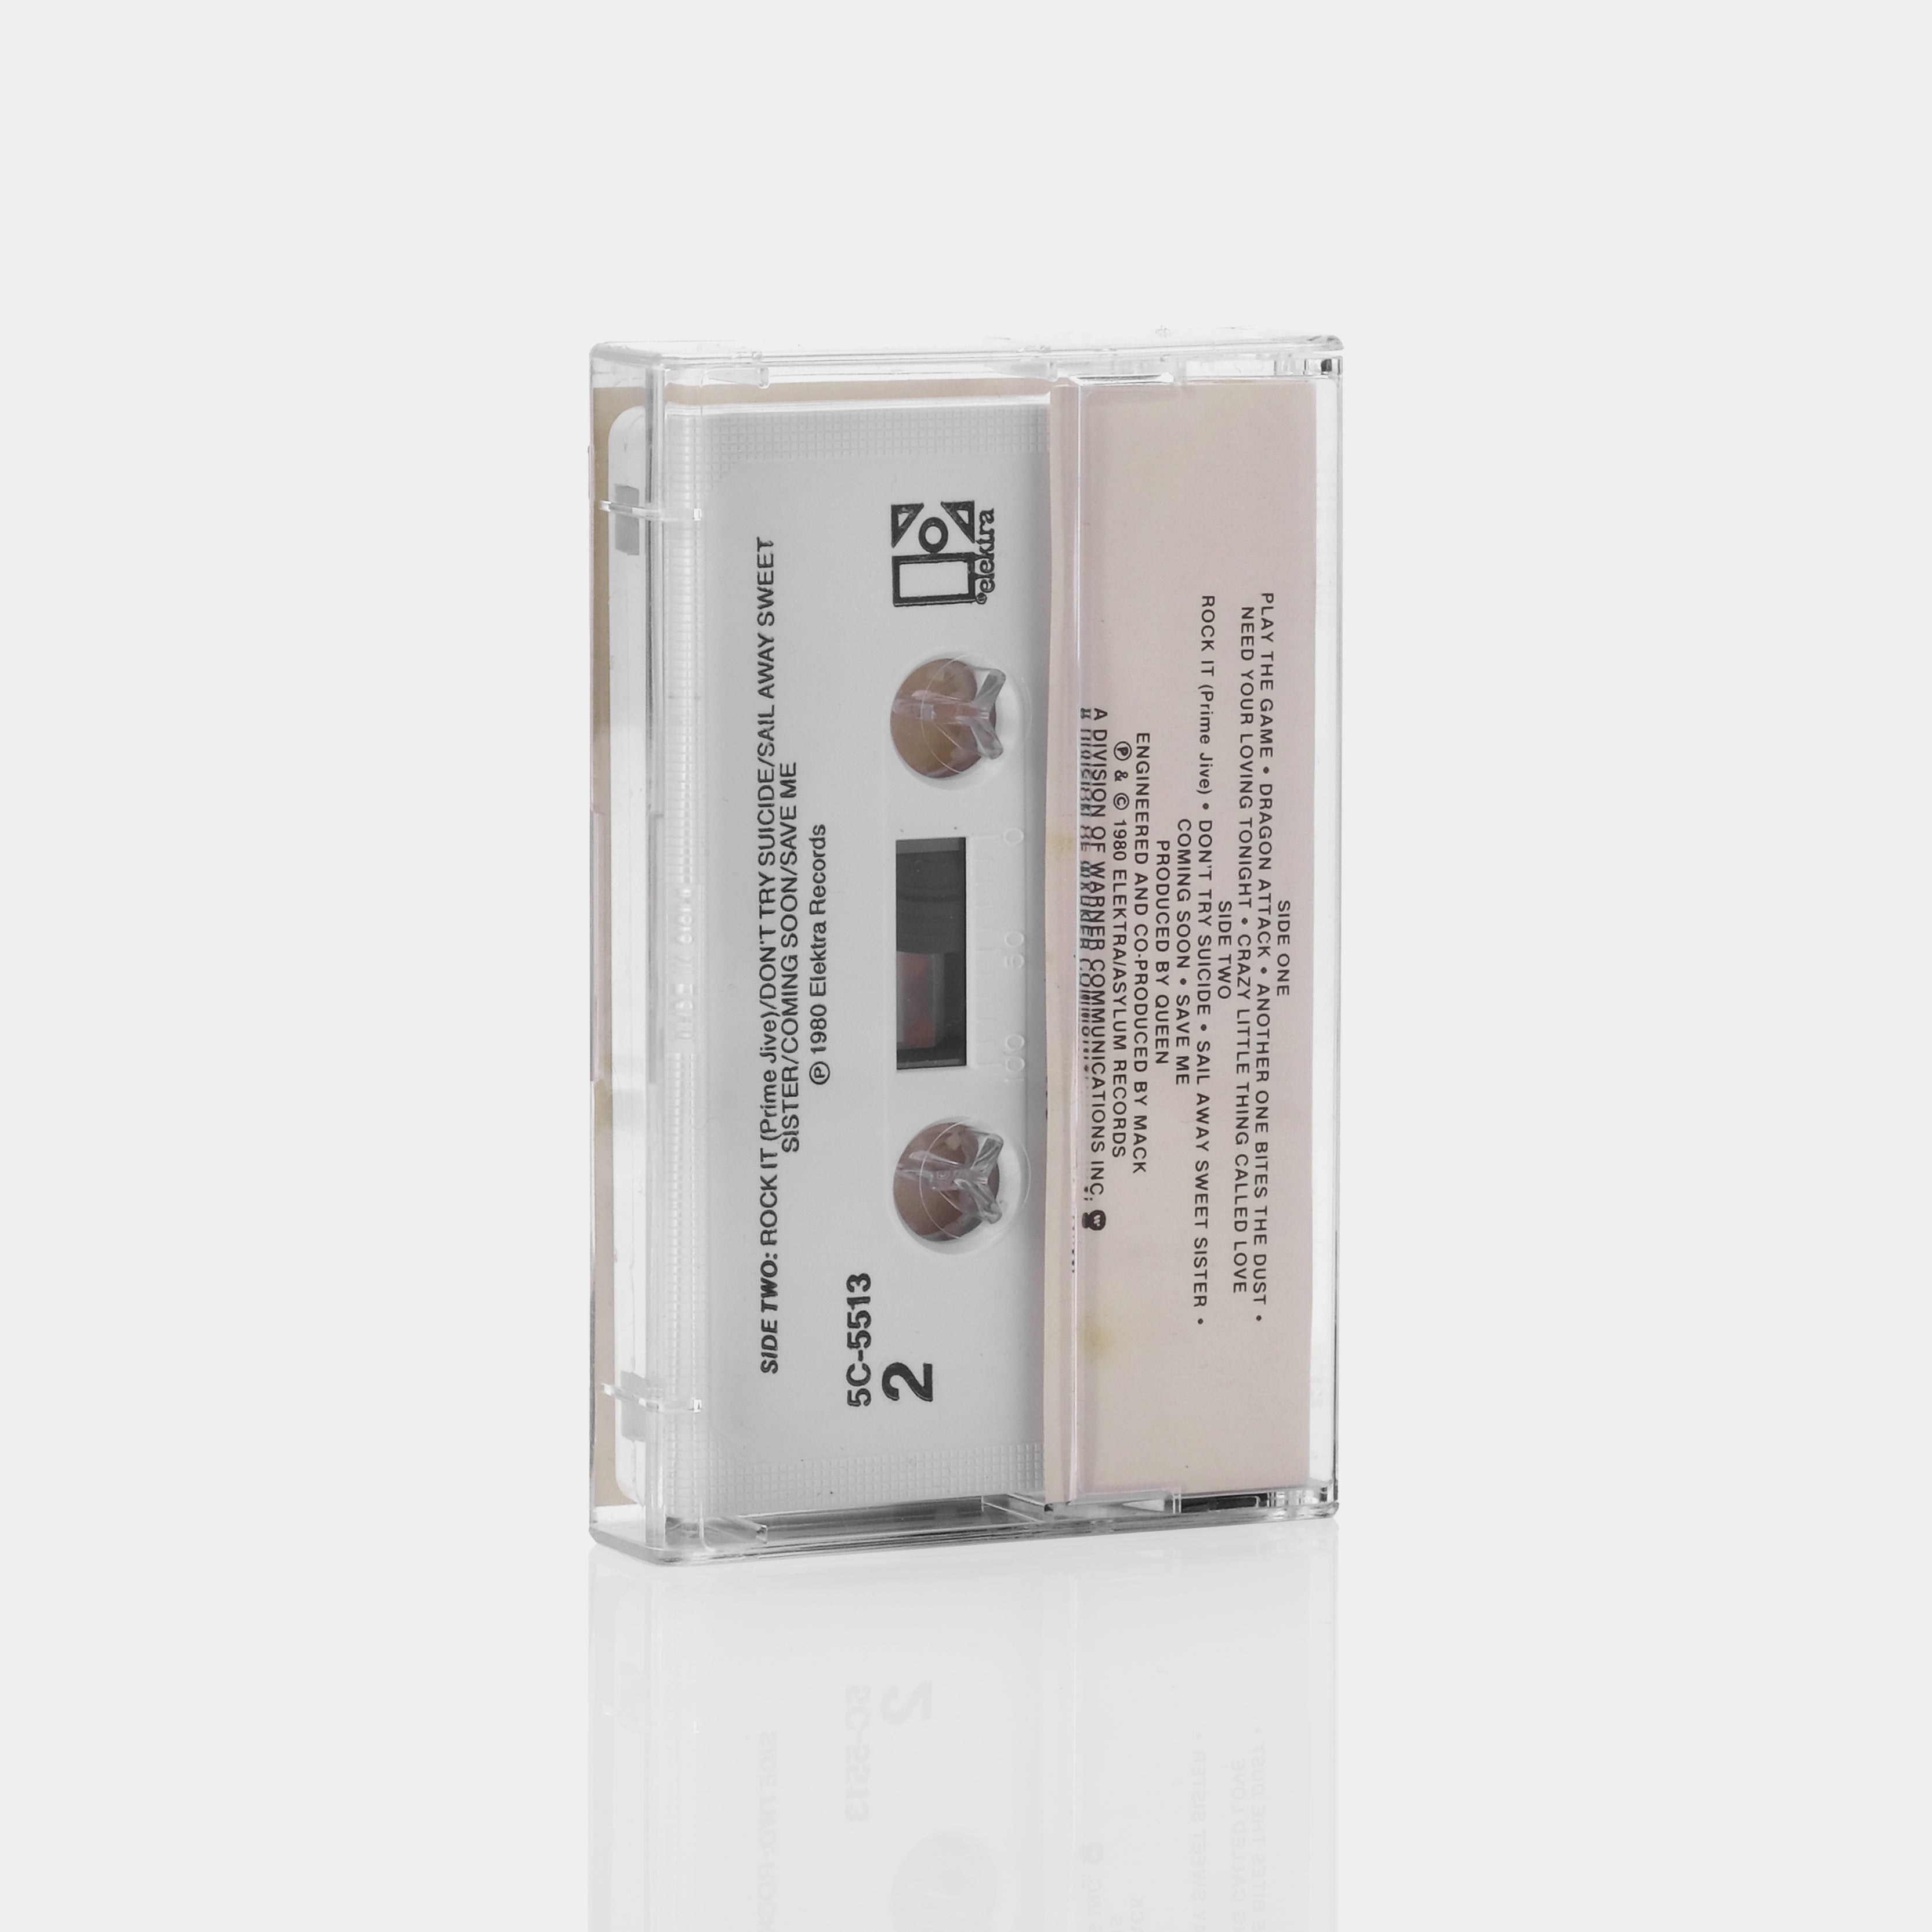 Queen - The Game Cassette Tape